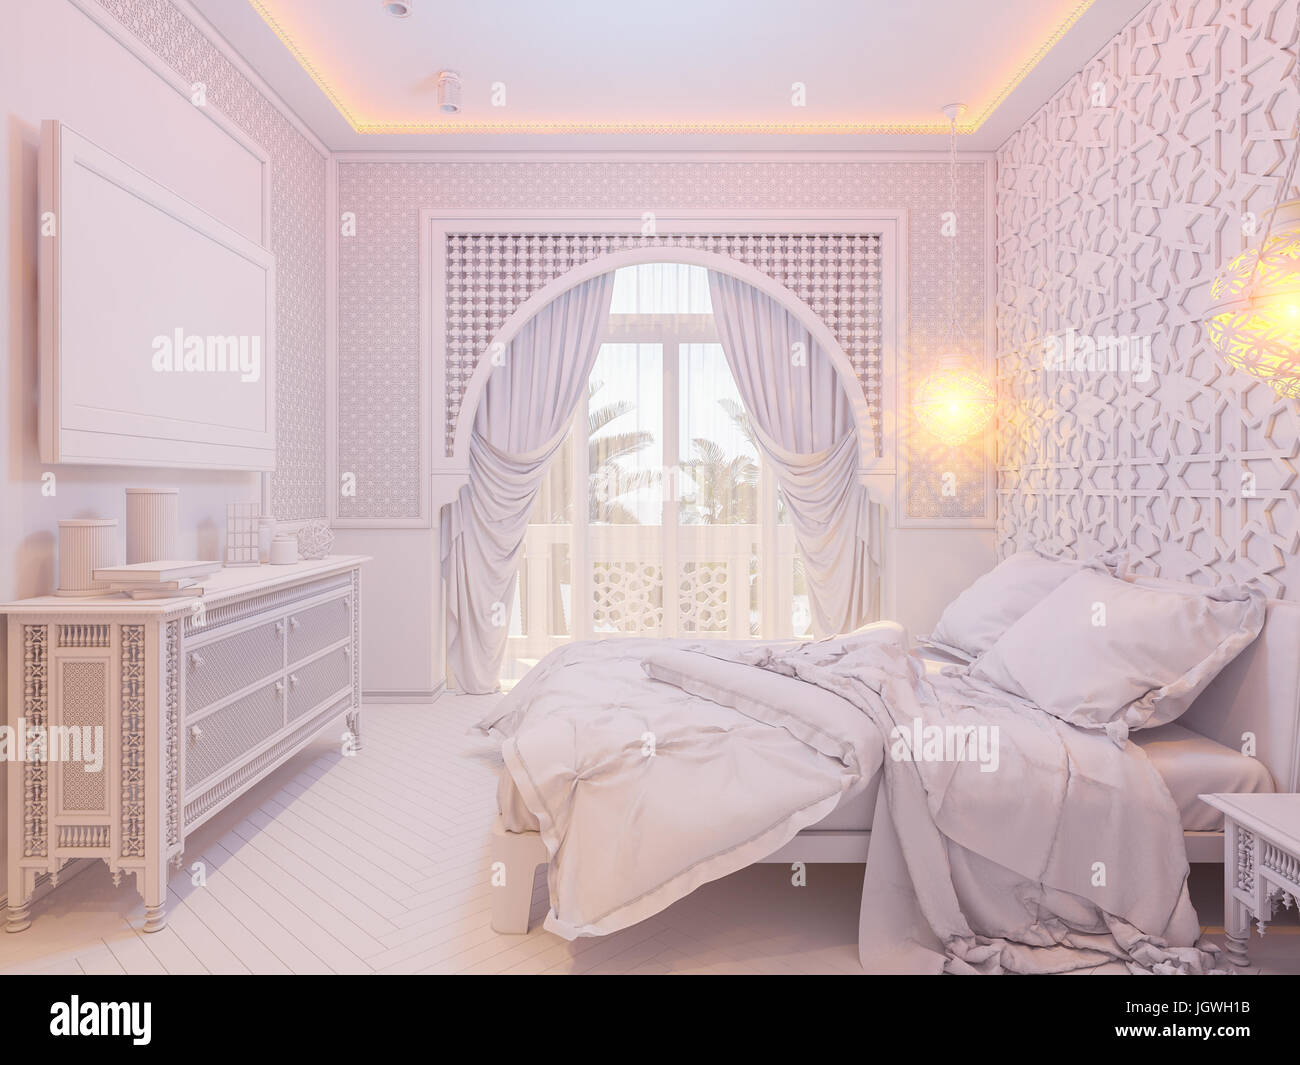 3d illustration bedroom interior design of a hotel room in a traditional Islamic style. Deluxe room background interior view decorated with arabian mo Stock Photo